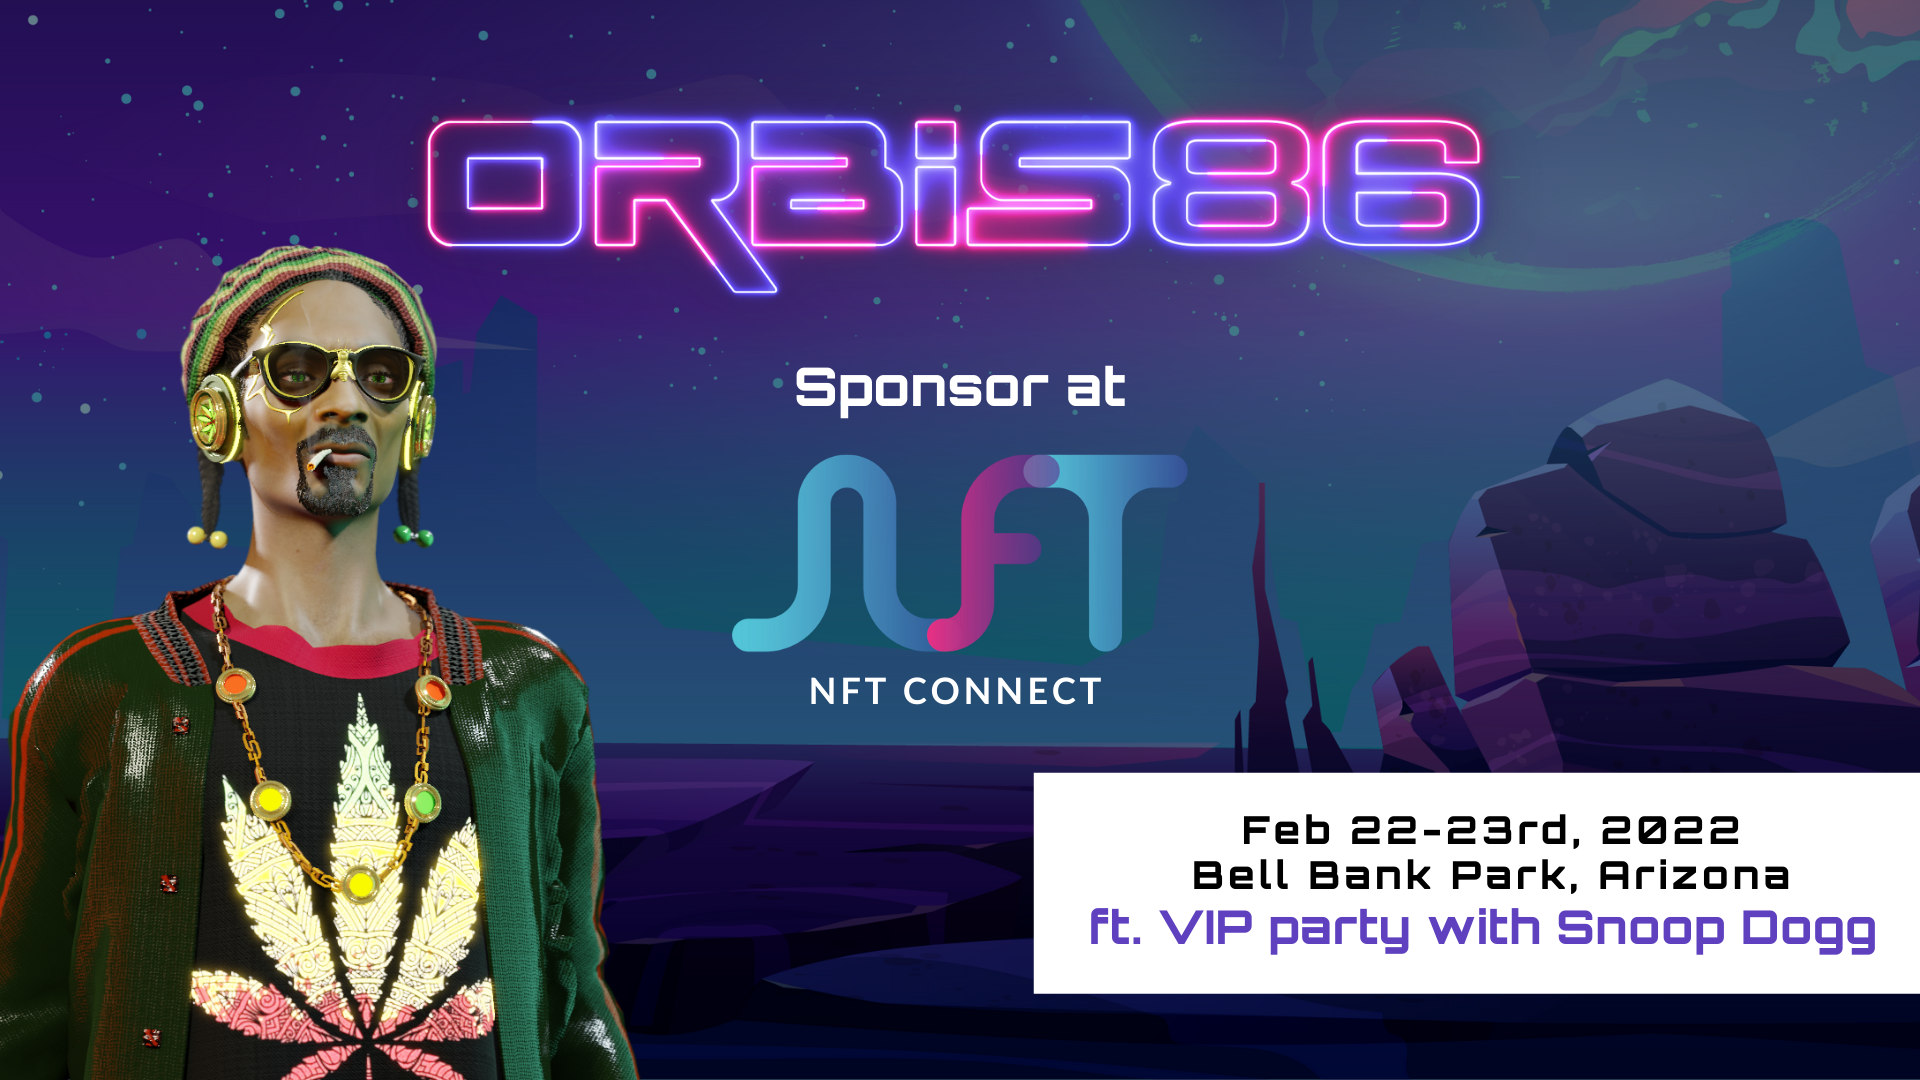 Arizona to host NFT Connect conference featuring VIP party with Snoop Dogg and with Orbis86 as a sponsor